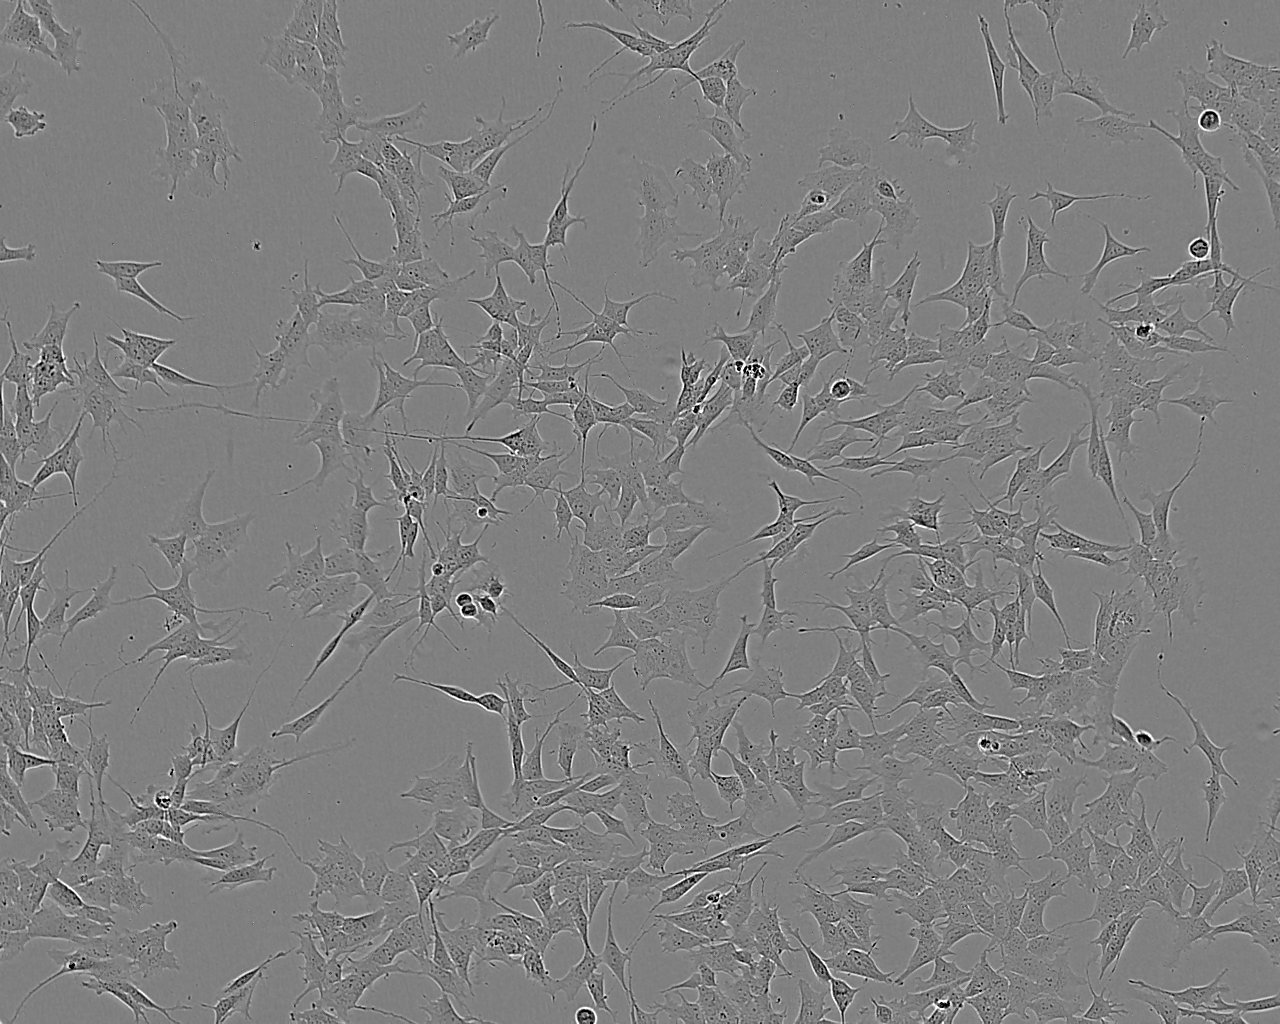 MMAc-SF epithelioid cells黑色素瘤细胞系,MMAc-SF epithelioid cells